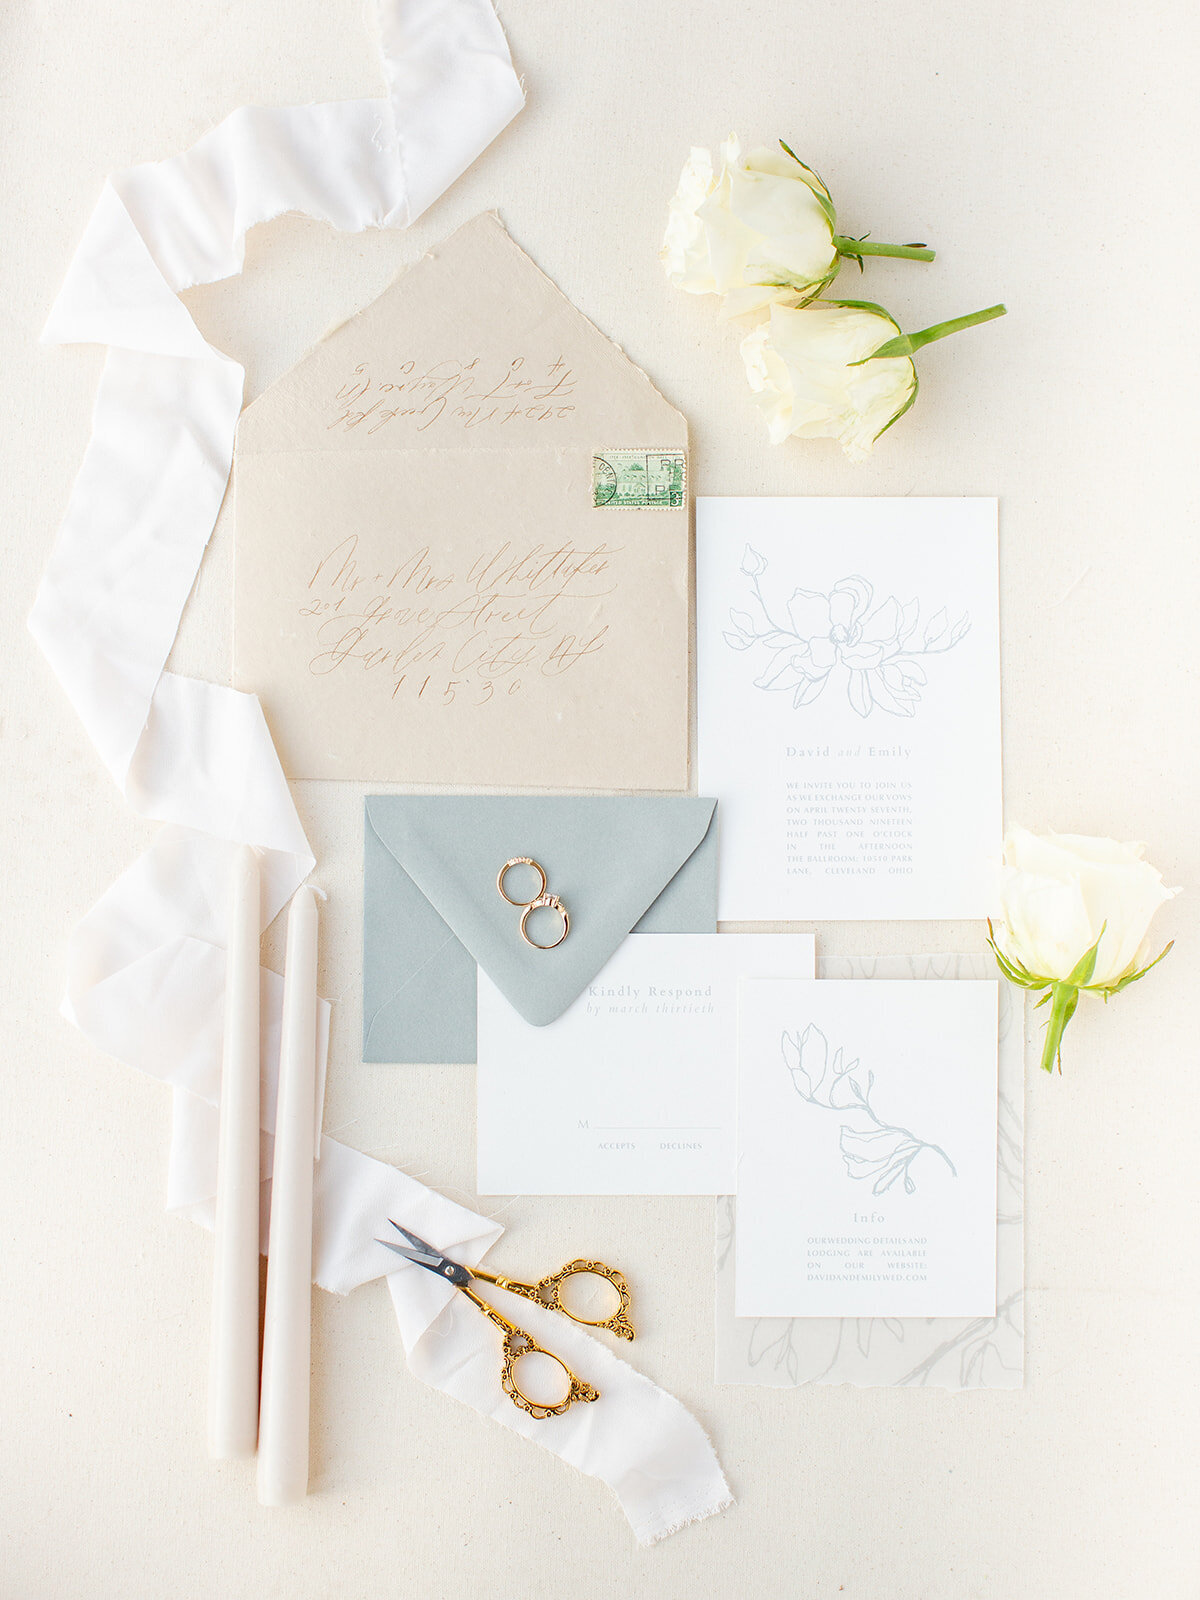 blue floral invitation suite with  small decor